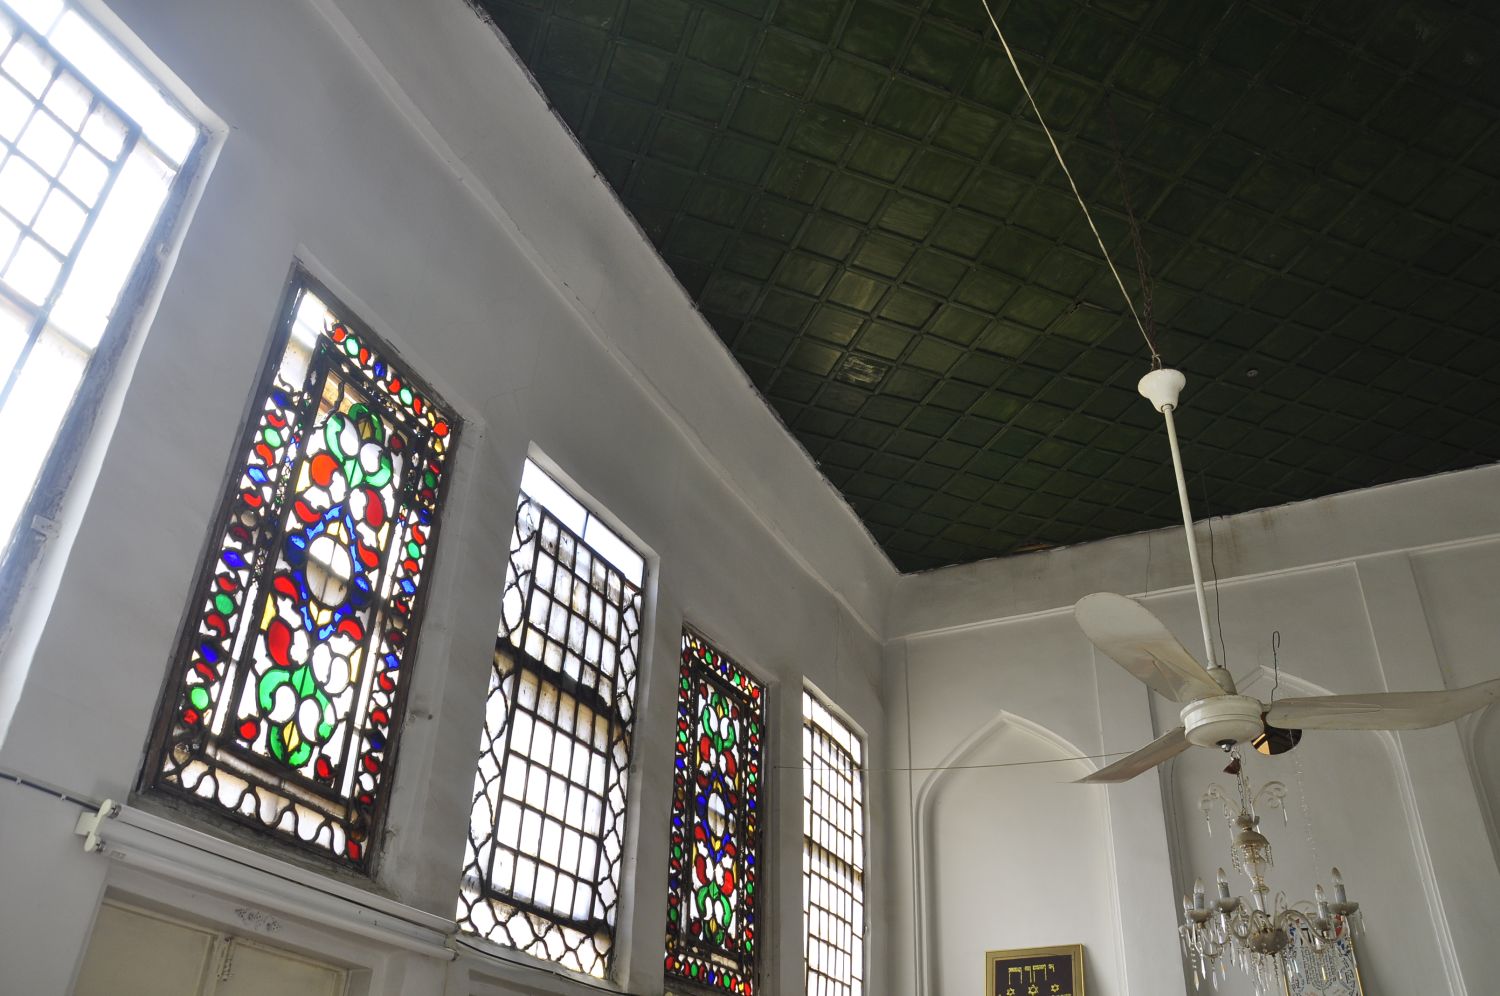 Ceiling and stained glass windows.